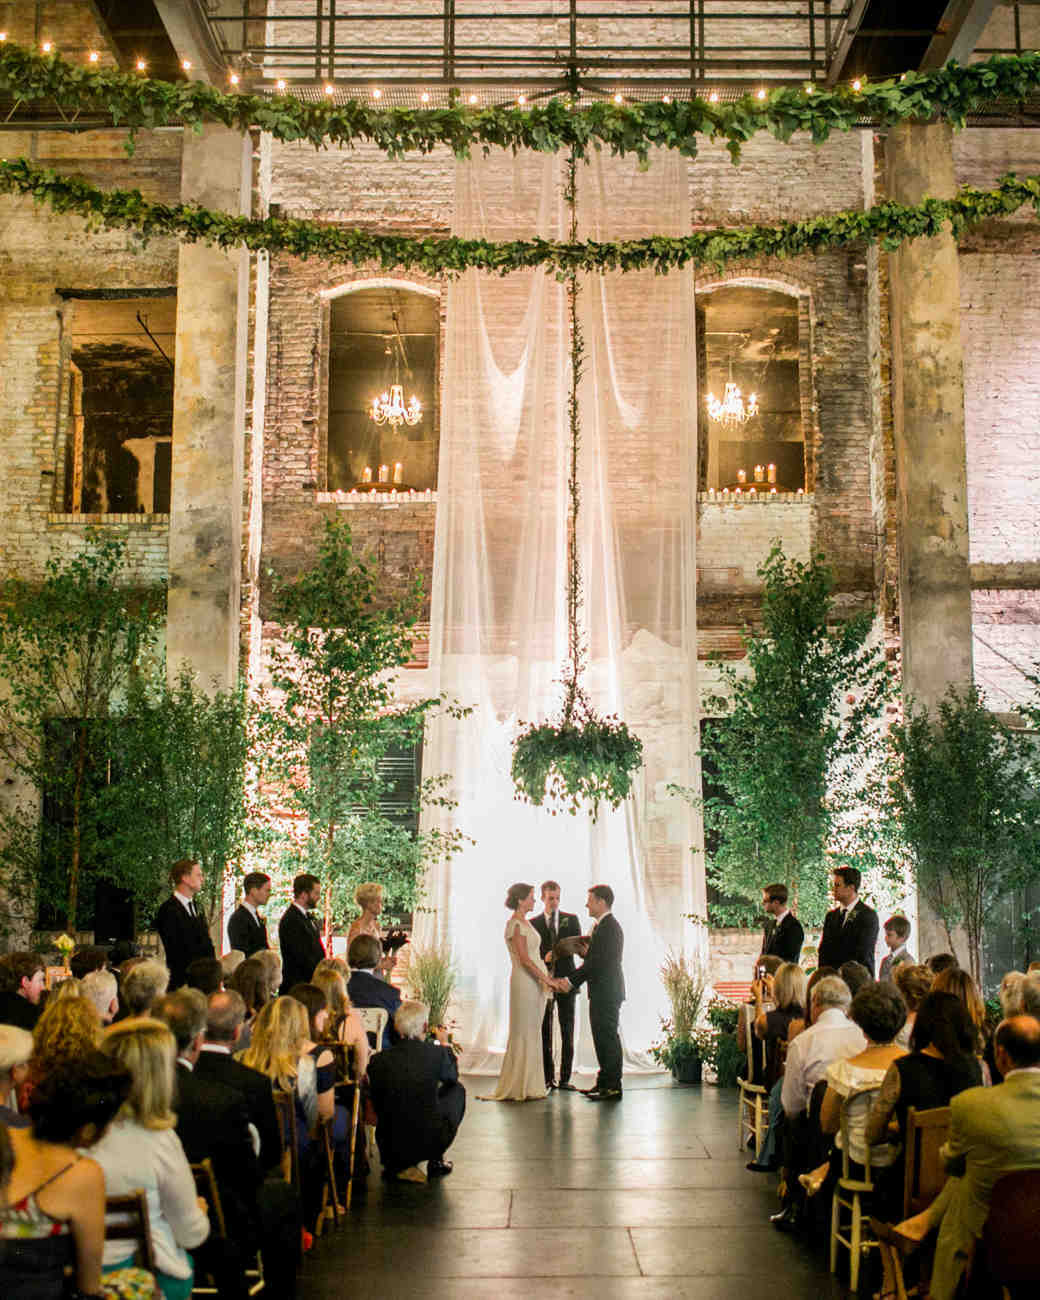 Local Wedding Venues
 Restored Warehouses Where You Can Tie the Knot